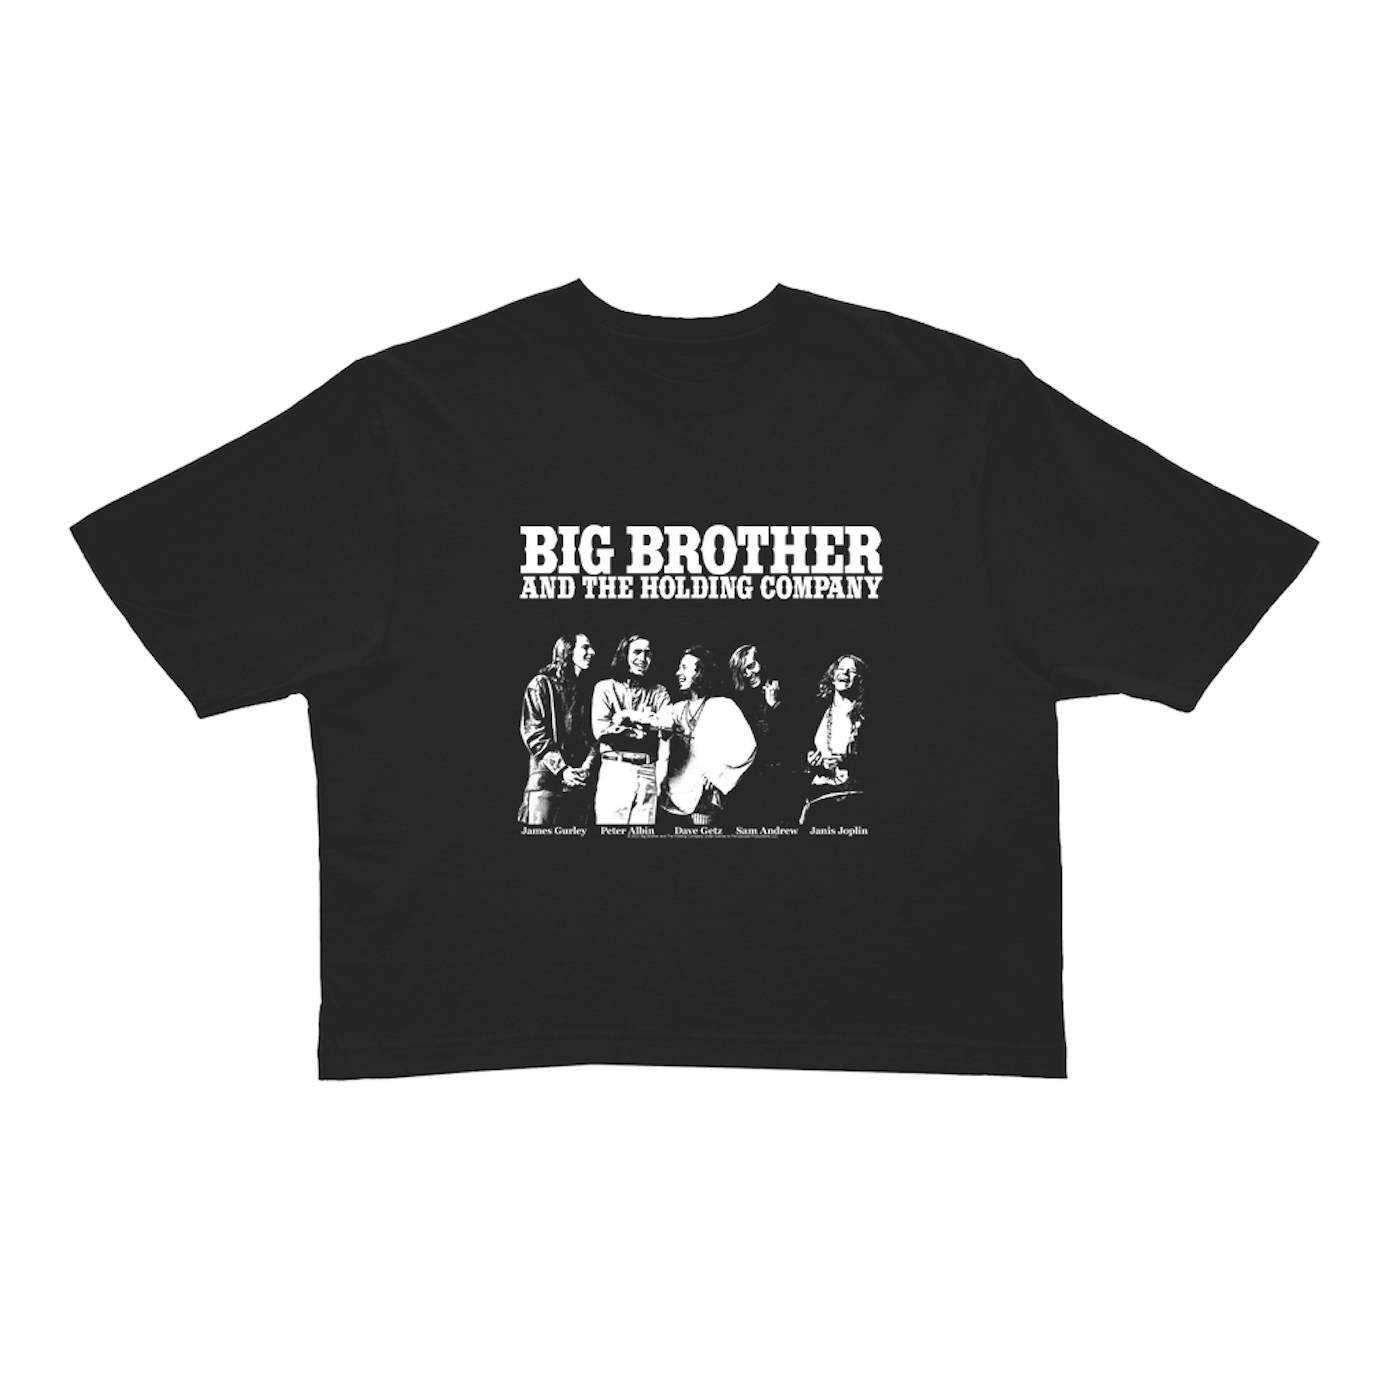 Big Brother & The Holding Company Big Brother and The Holding Co. Ladies' Crop Tee | Featuring Janis Joplin Black and White Photo Big Brother and The Holding Co. Crop T-shirt